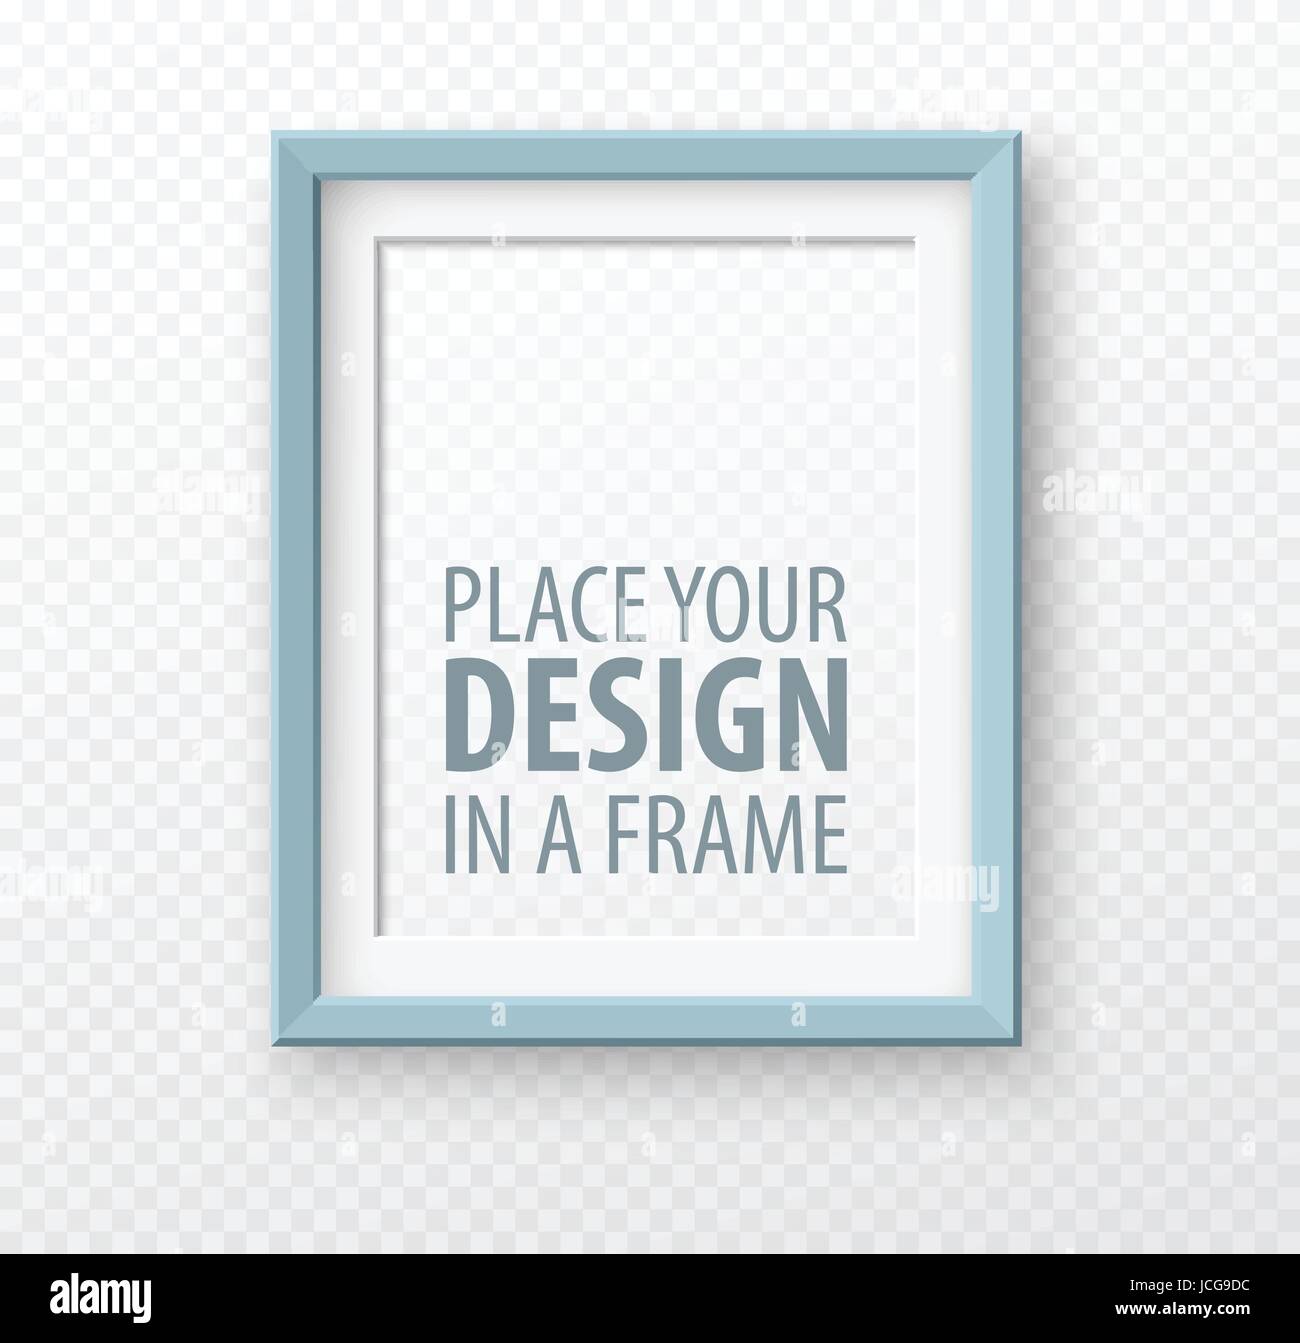 Vertical frame mock up on transparence background with realistic shadows. Vector illustration Stock Vector